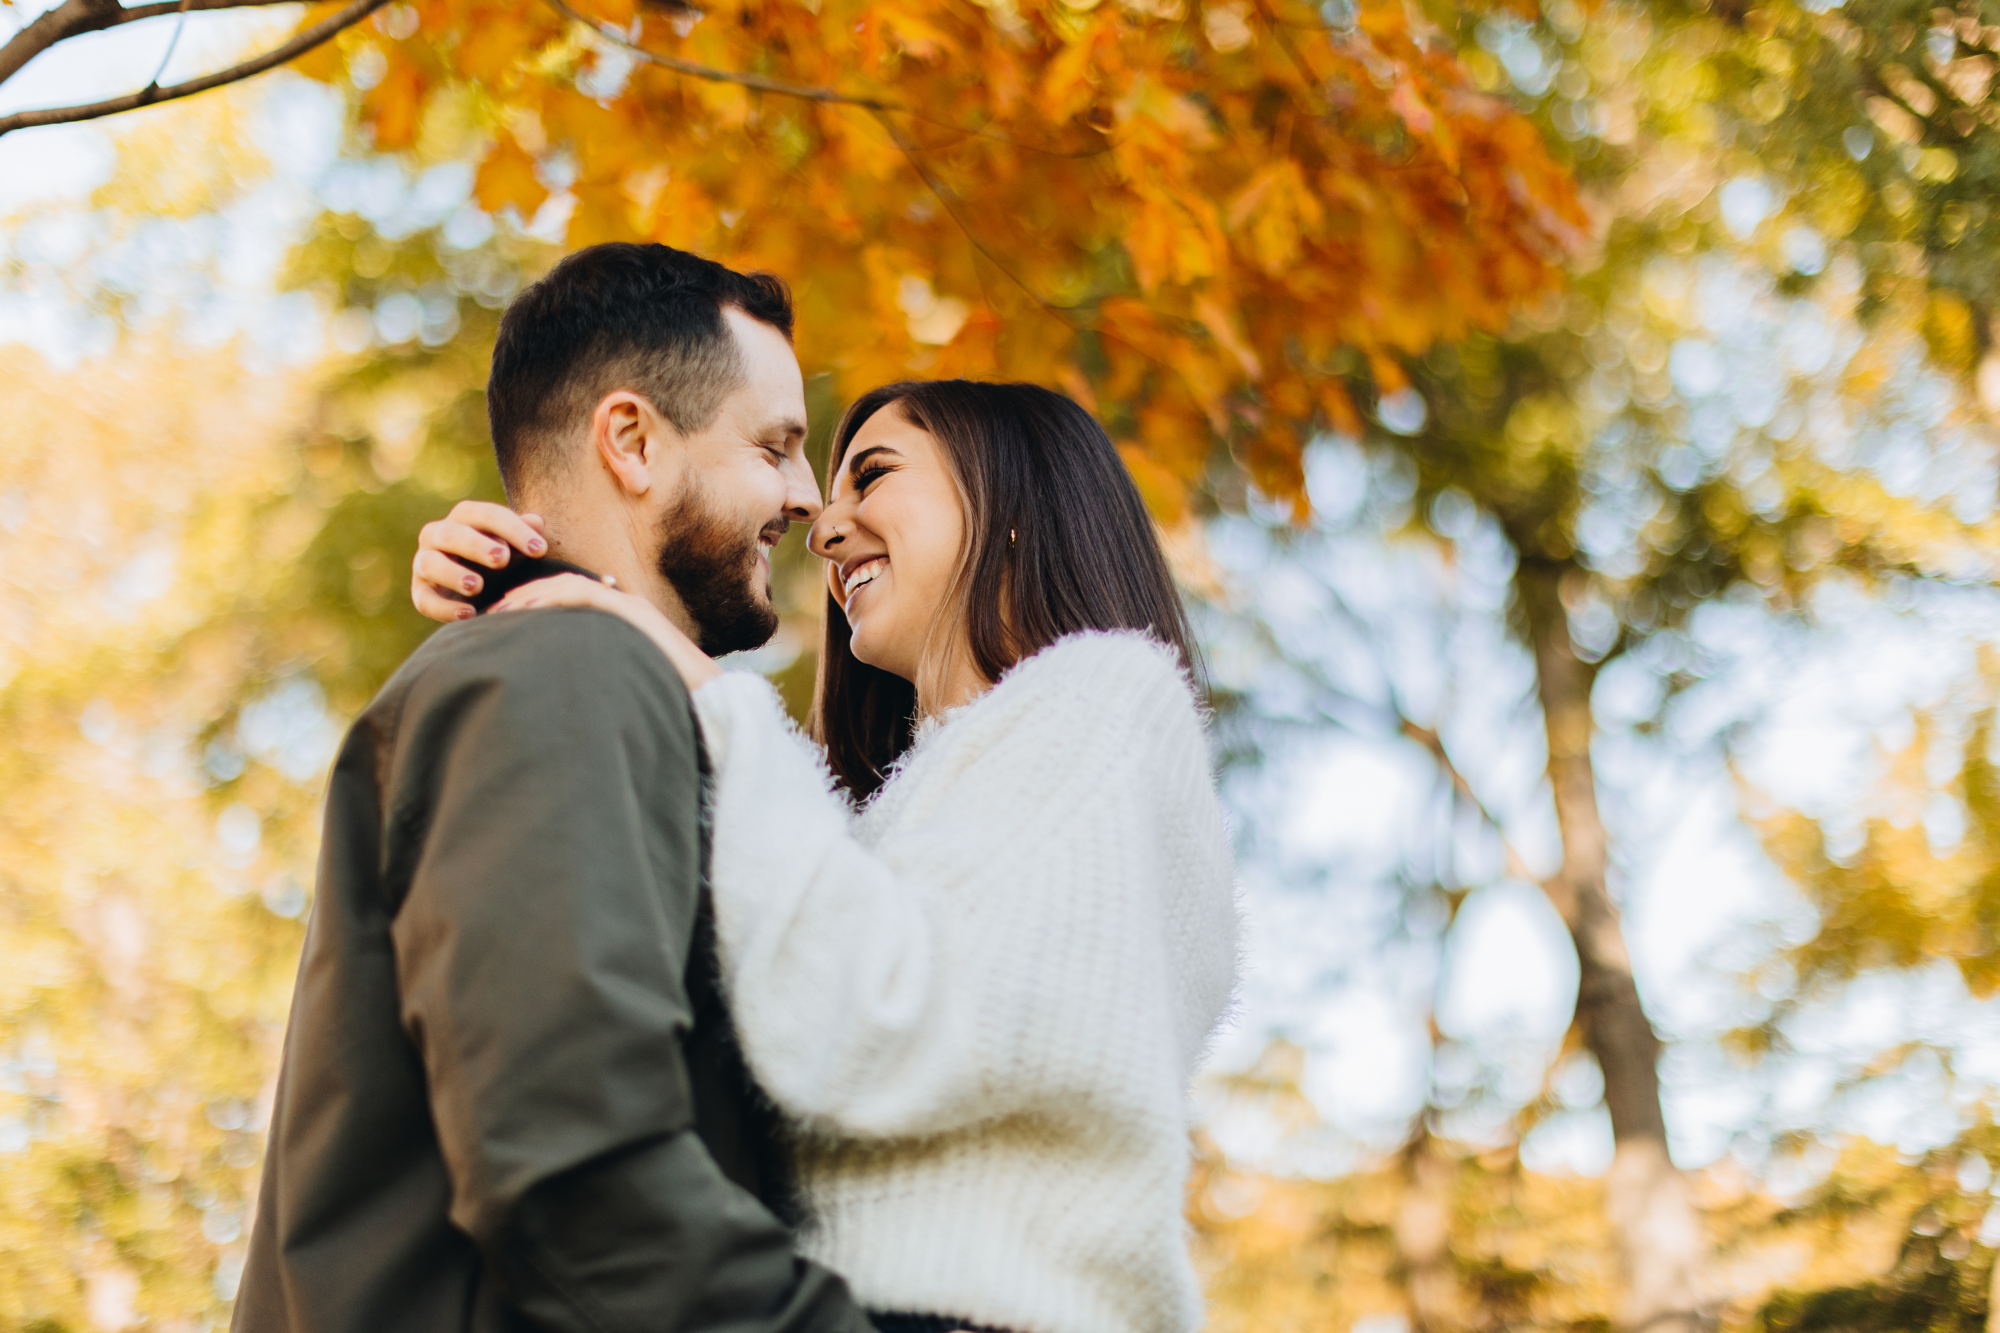 Pretty Fall Engagement Photos in Astoria Park, Queens, New York